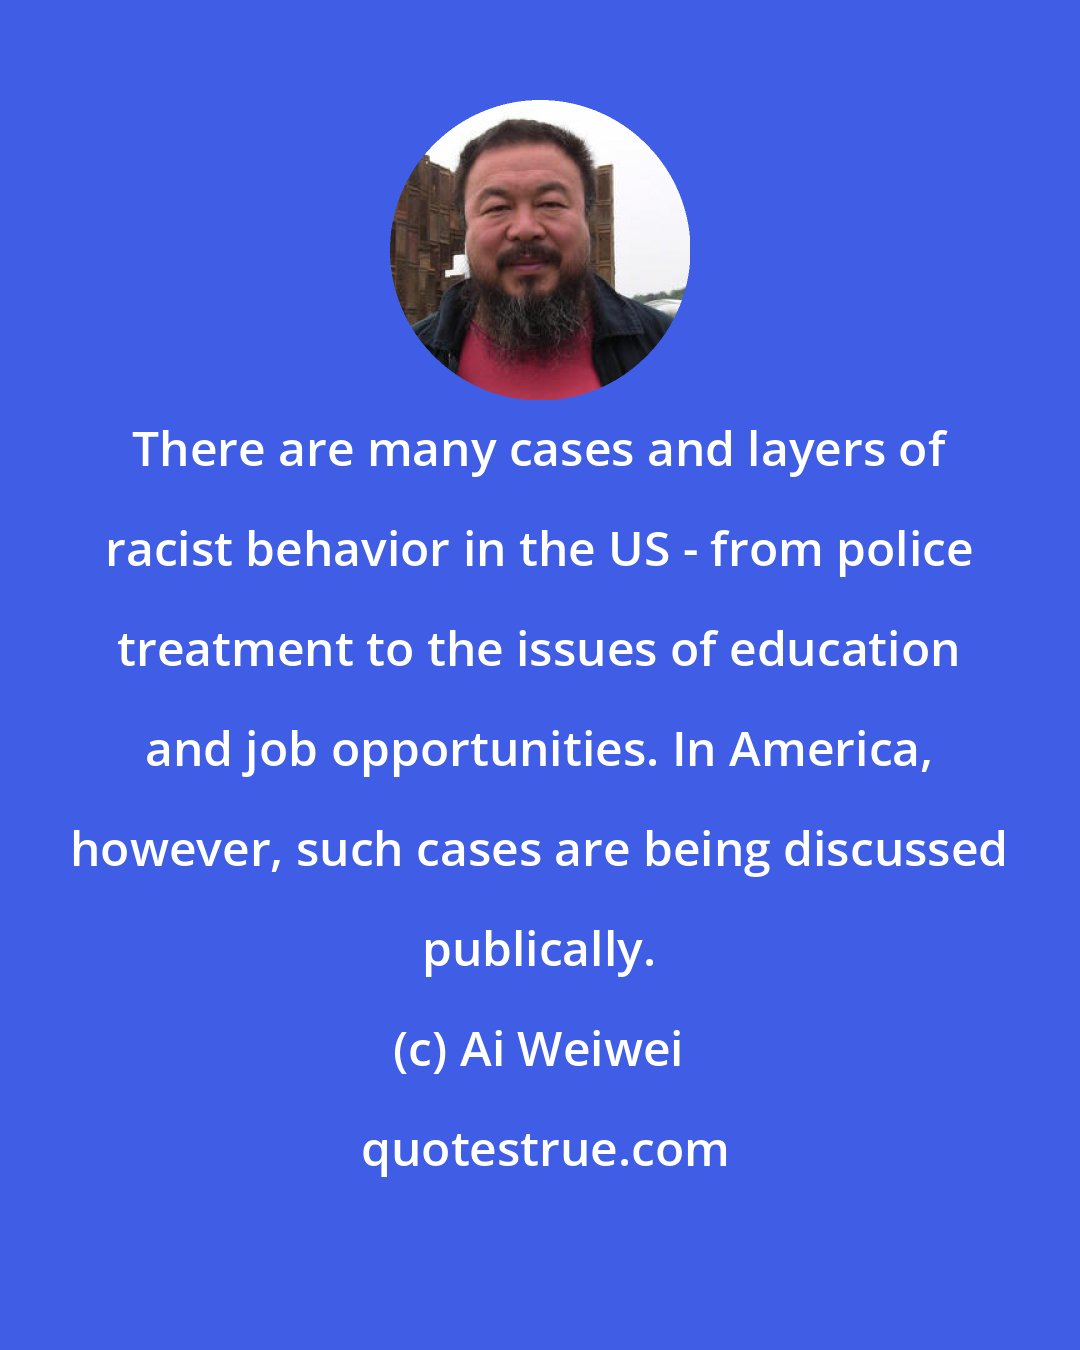 Ai Weiwei: There are many cases and layers of racist behavior in the US - from police treatment to the issues of education and job opportunities. In America, however, such cases are being discussed publically.